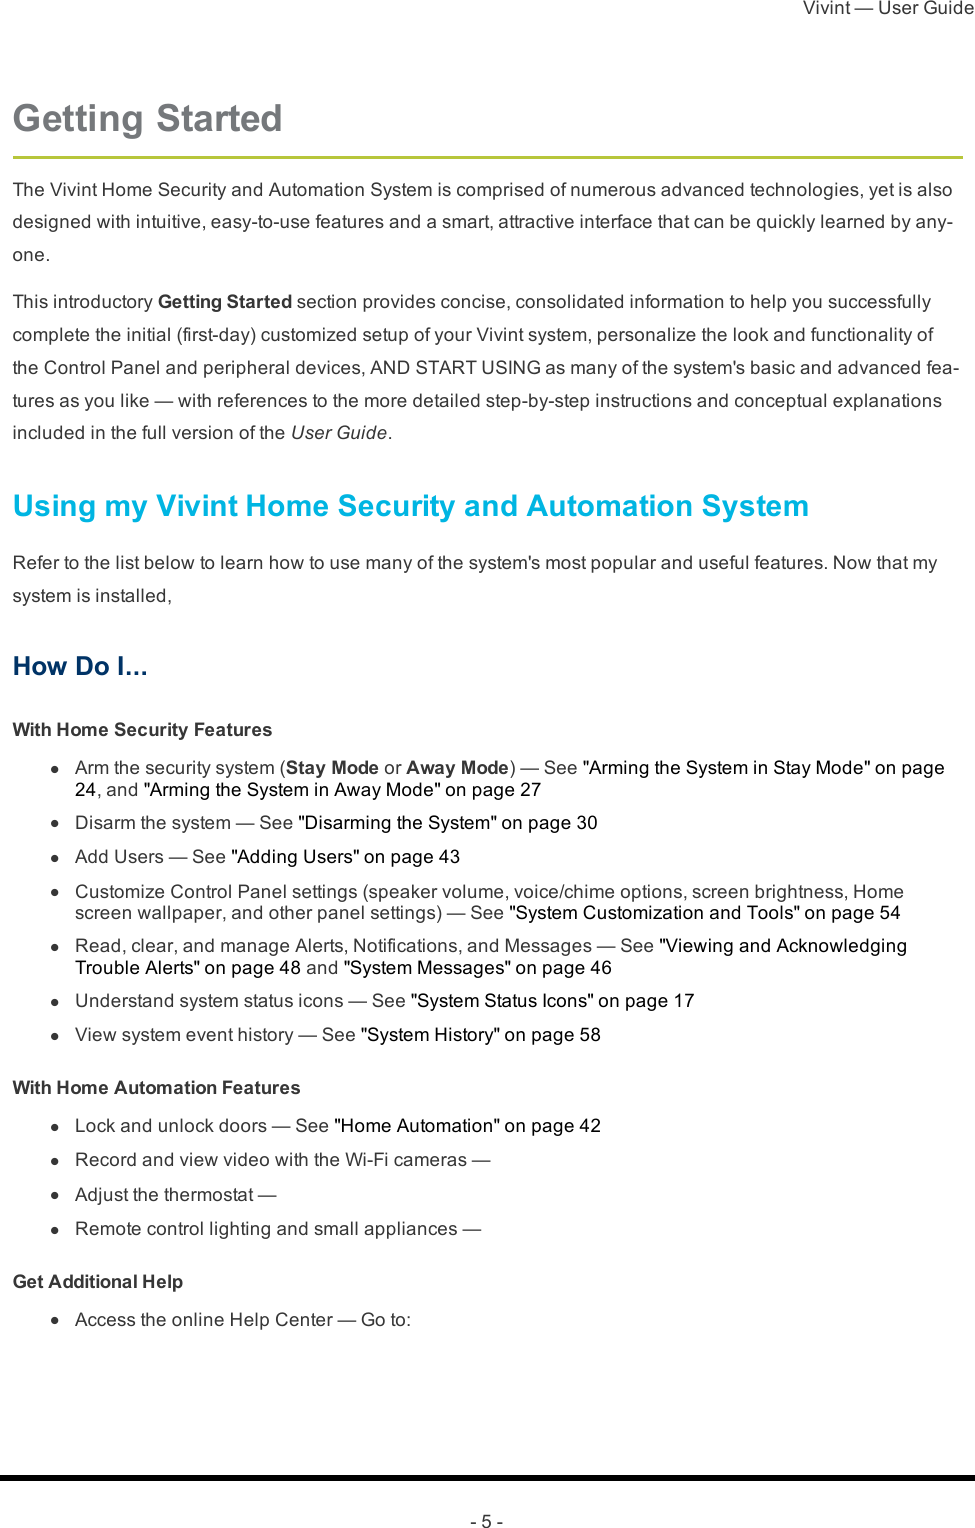 Vivint — User Guide- 5 -Getting StartedThe Vivint Home Security and Automation System is comprised of numerous advanced technologies, yet is also designed with intuitive, easy-to-use features and a smart, attractive interface that can be quickly learned by any-one.This introductory Getting Started section provides concise, consolidated information to help you successfully complete the initial (first-day) customized setup of your Vivint system, personalize the look and functionality of the Control Panel and peripheral devices, AND START USING as many of the system&apos;s basic and advanced fea-tures as you like — with references to the more detailed step-by-step instructions and conceptual explanations included in the full version of the User Guide.Using my Vivint Home Security and Automation SystemRefer to the list below to learn how to use many of the system&apos;s most popular and useful features. Now that my system is installed,How Do I...With Home Security Features l  Arm the security system (Stay Mode or Away Mode) — See &quot;Arming the System in Stay Mode&quot; on page 24, and &quot;Arming the System in Away Mode&quot; on page 27 l  Disarm the system — See &quot;Disarming the System&quot; on page 30 l  Add Users — See &quot;Adding Users&quot; on page 43 l  Customize Control Panel settings (speaker volume, voice/chime options, screen brightness, Home screen wallpaper, and other panel settings) — See &quot;System Customization and Tools&quot; on page 54 l  Read, clear, and manage Alerts, Notifications, and Messages — See &quot;Viewing and Acknowledging Trouble Alerts&quot; on page 48 and &quot;System Messages&quot; on page 46 l  Understand system status icons — See &quot;System Status Icons&quot; on page 17 l  View system event history — See &quot;System History&quot; on page 58With Home Automation Features l  Lock and unlock doors — See &quot;Home Automation&quot; on page 42 l  Record and view video with the Wi-Fi cameras —  l  Adjust the thermostat —  l  Remote control lighting and small appliances — Get Additional Help l  Access the online Help Center — Go to: 